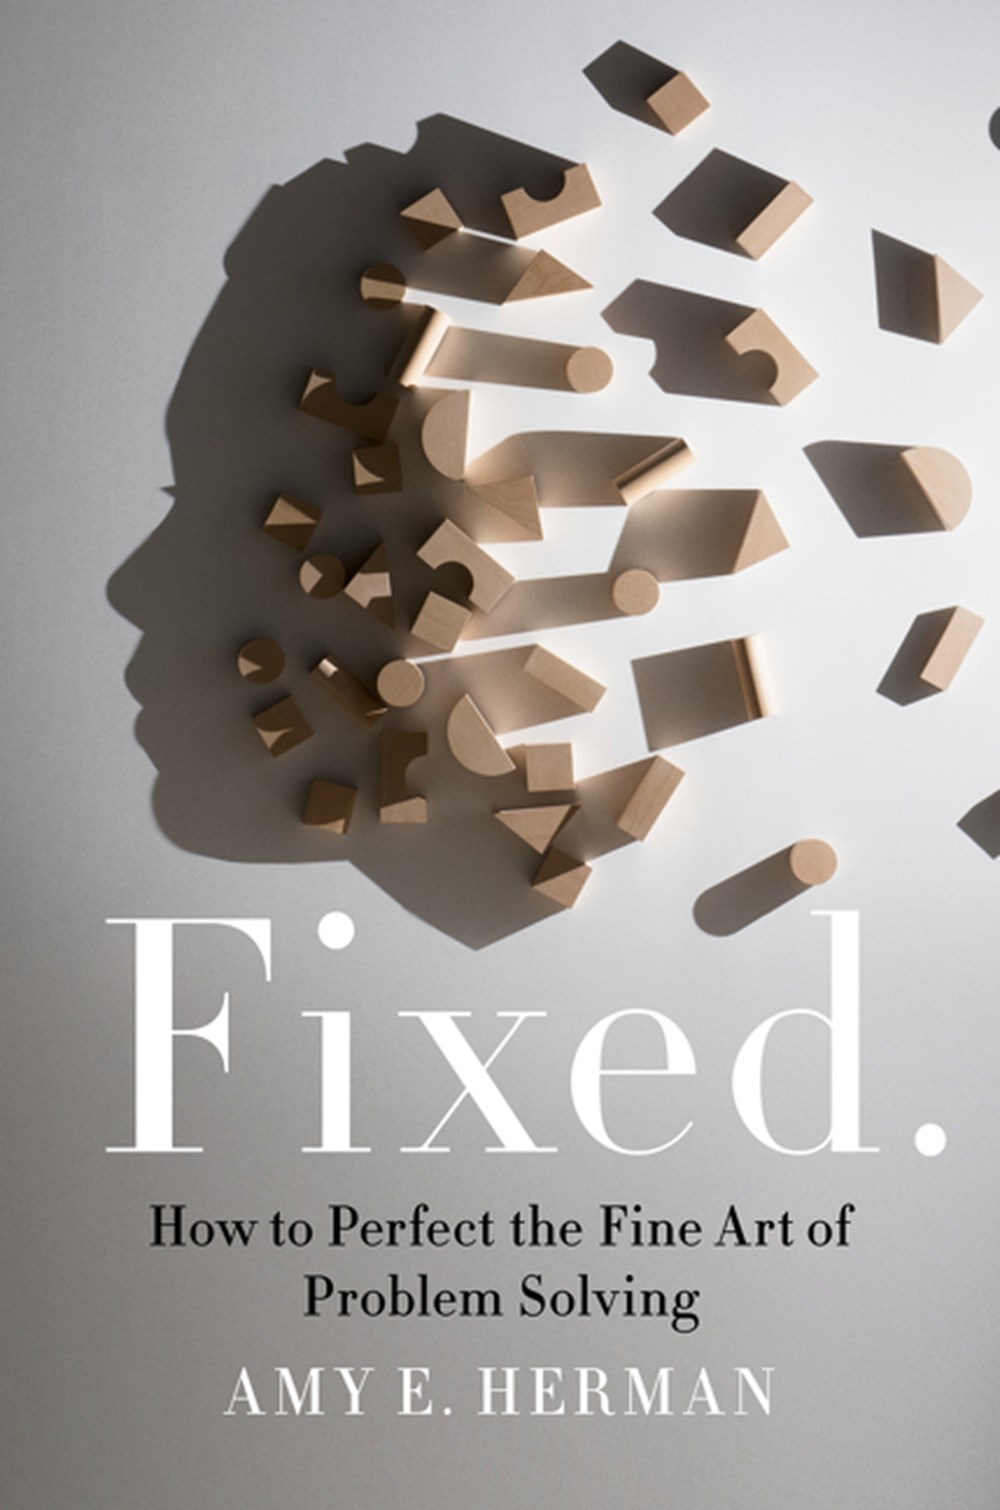 Fixed. How to Perfect the Fine Art of Problem Solving